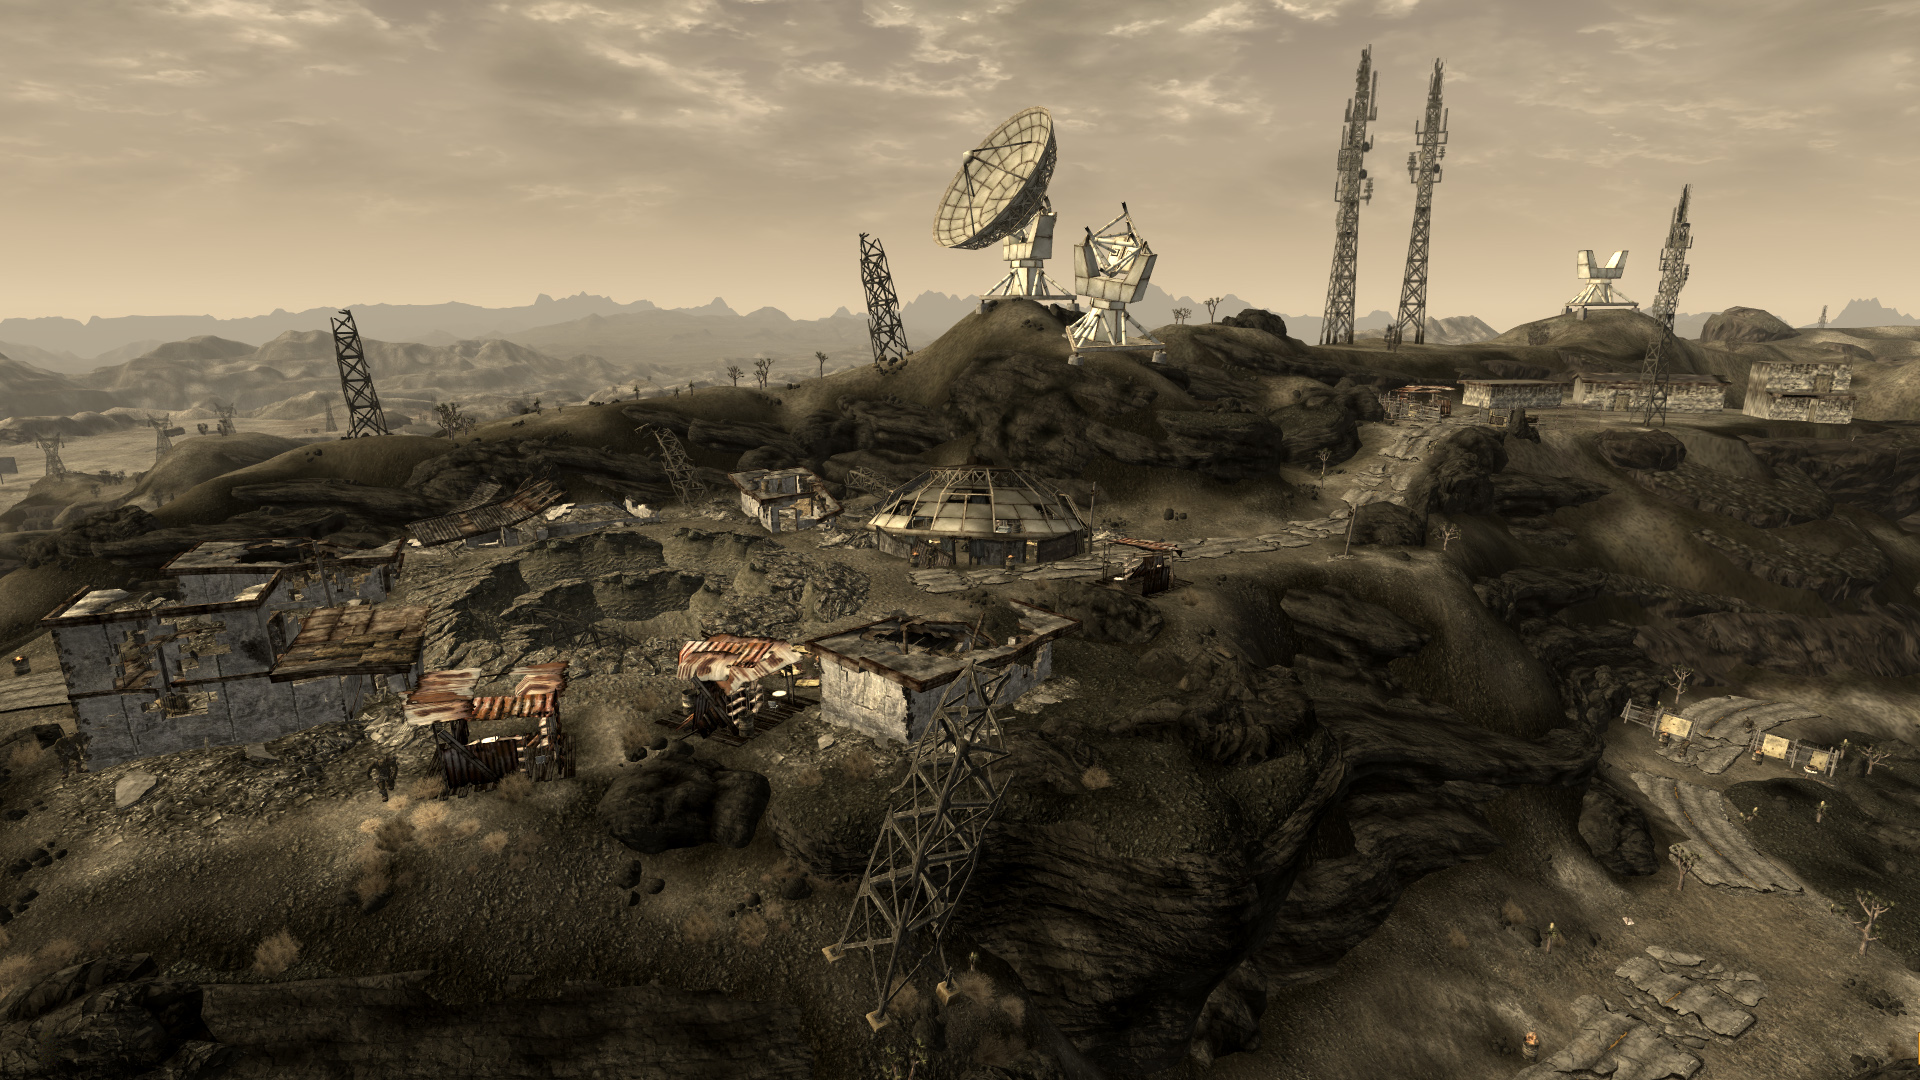 https://vignette.wikia.nocookie.net/fallout/images/f/f7/Black_Mountain_panorama.jpg